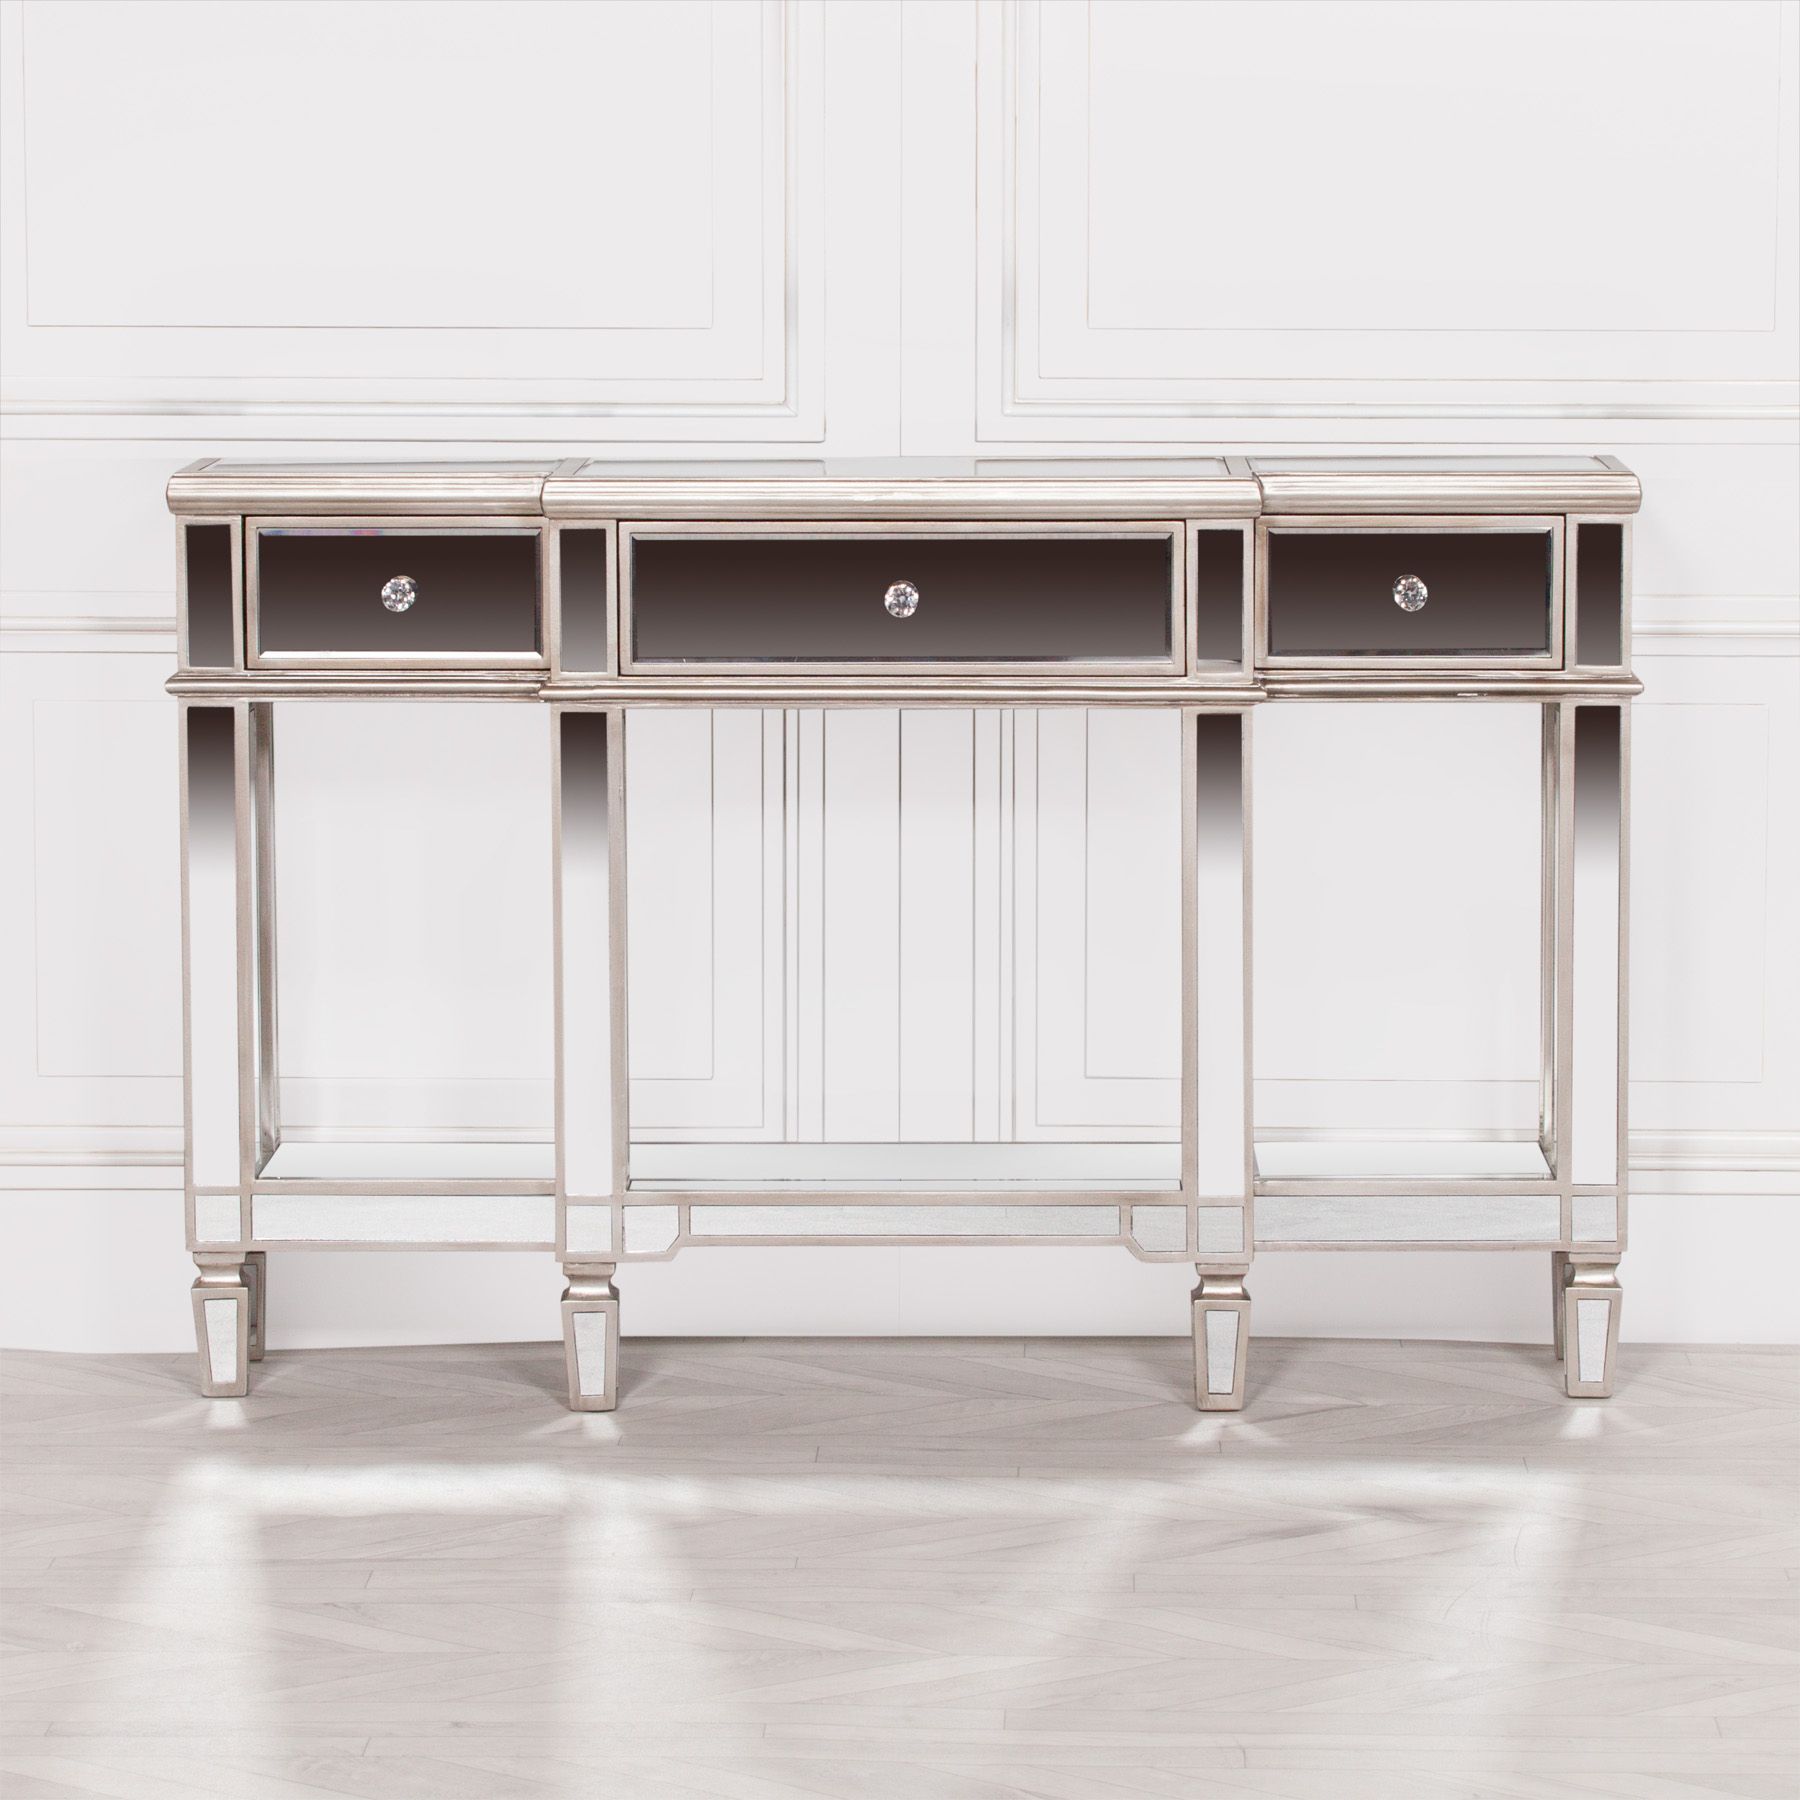 Champagne Silver Mirror Console Table – Maison Reproductions Regarding Silver Mirror And Chrome Console Tables (View 2 of 20)